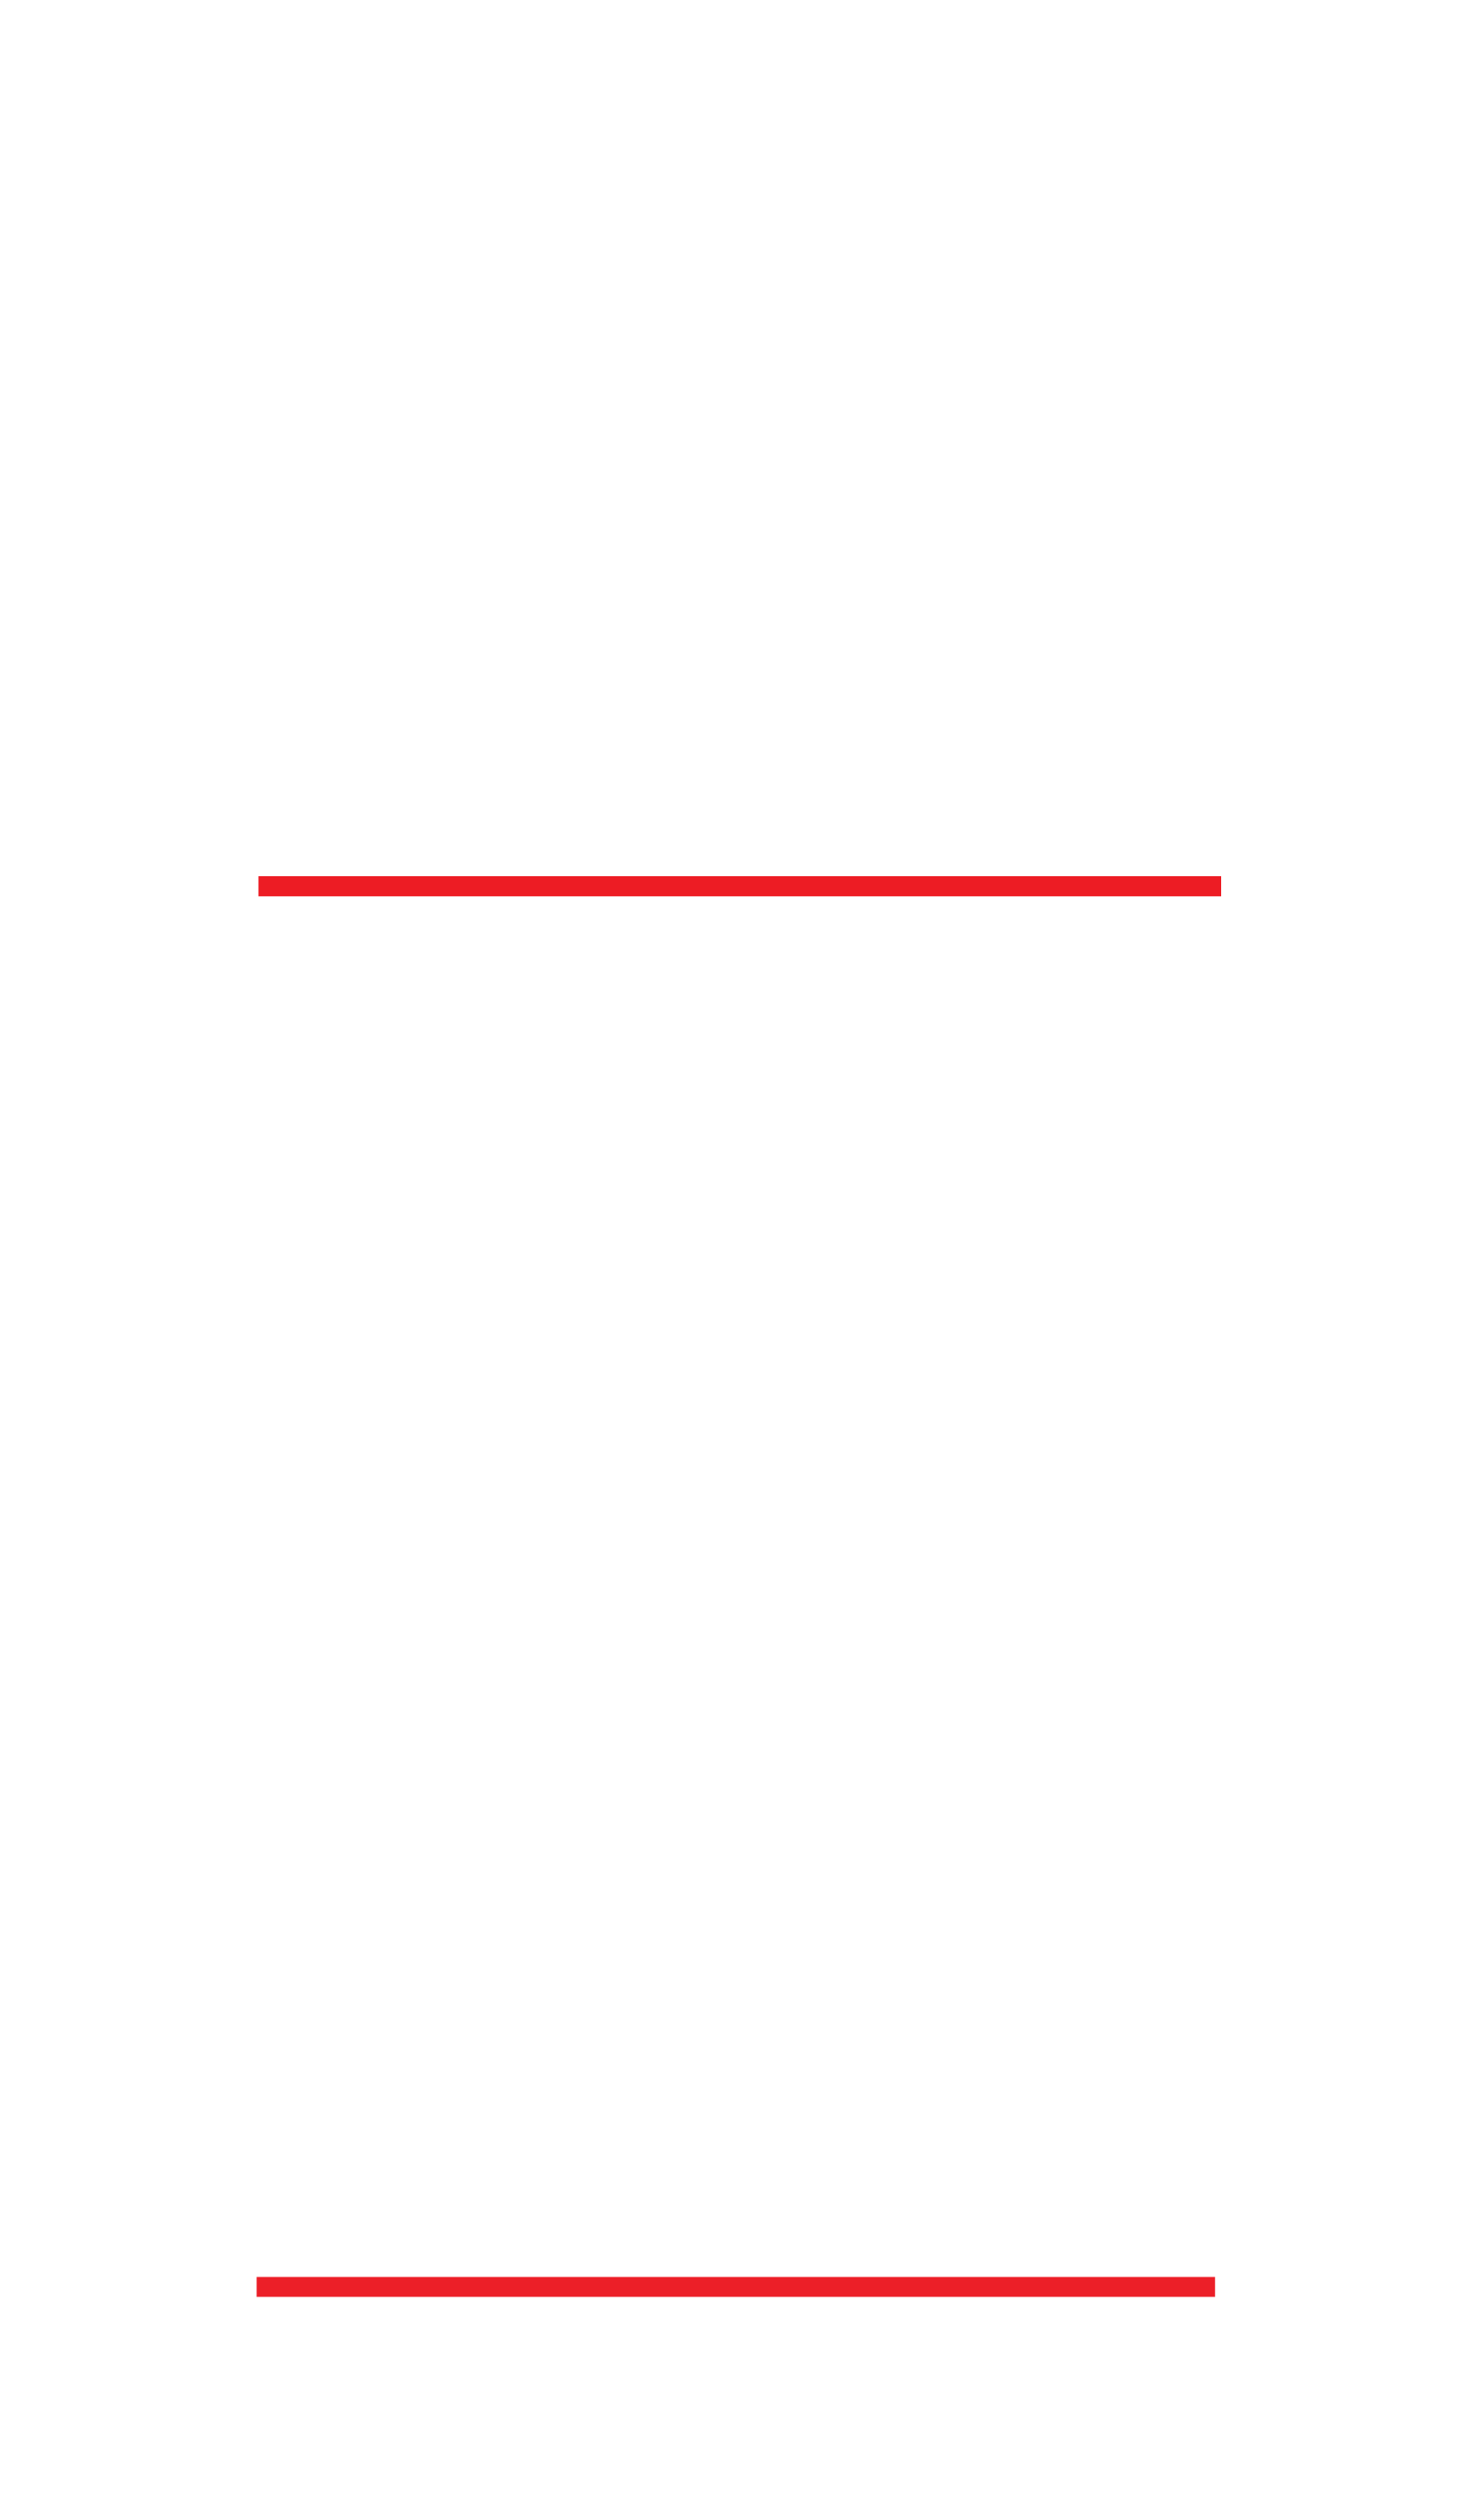 50 years of hip-hop in NYC: A look back on the Bronx-born